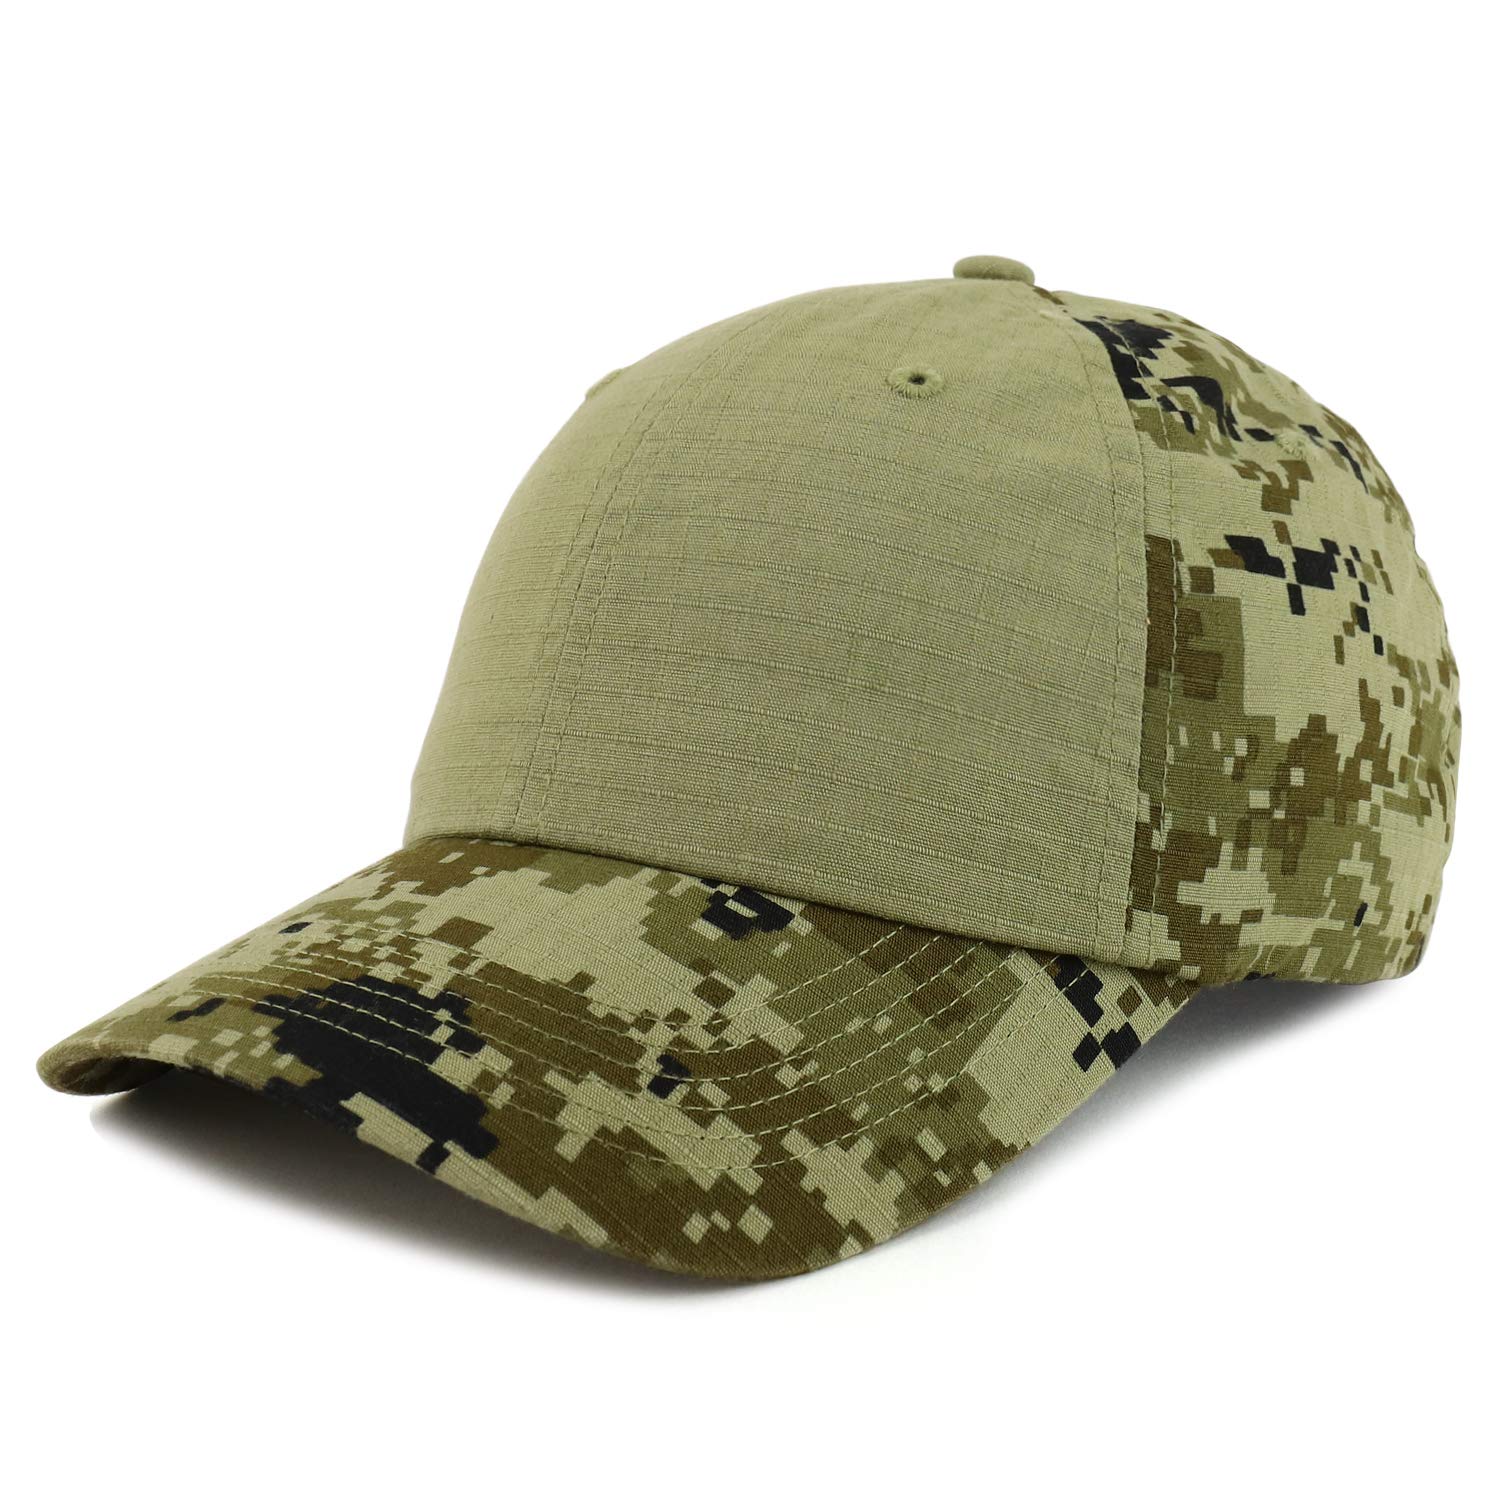 Armycrew Two Tone Digital Camouflage Unstructured Ripstop Cap - Green